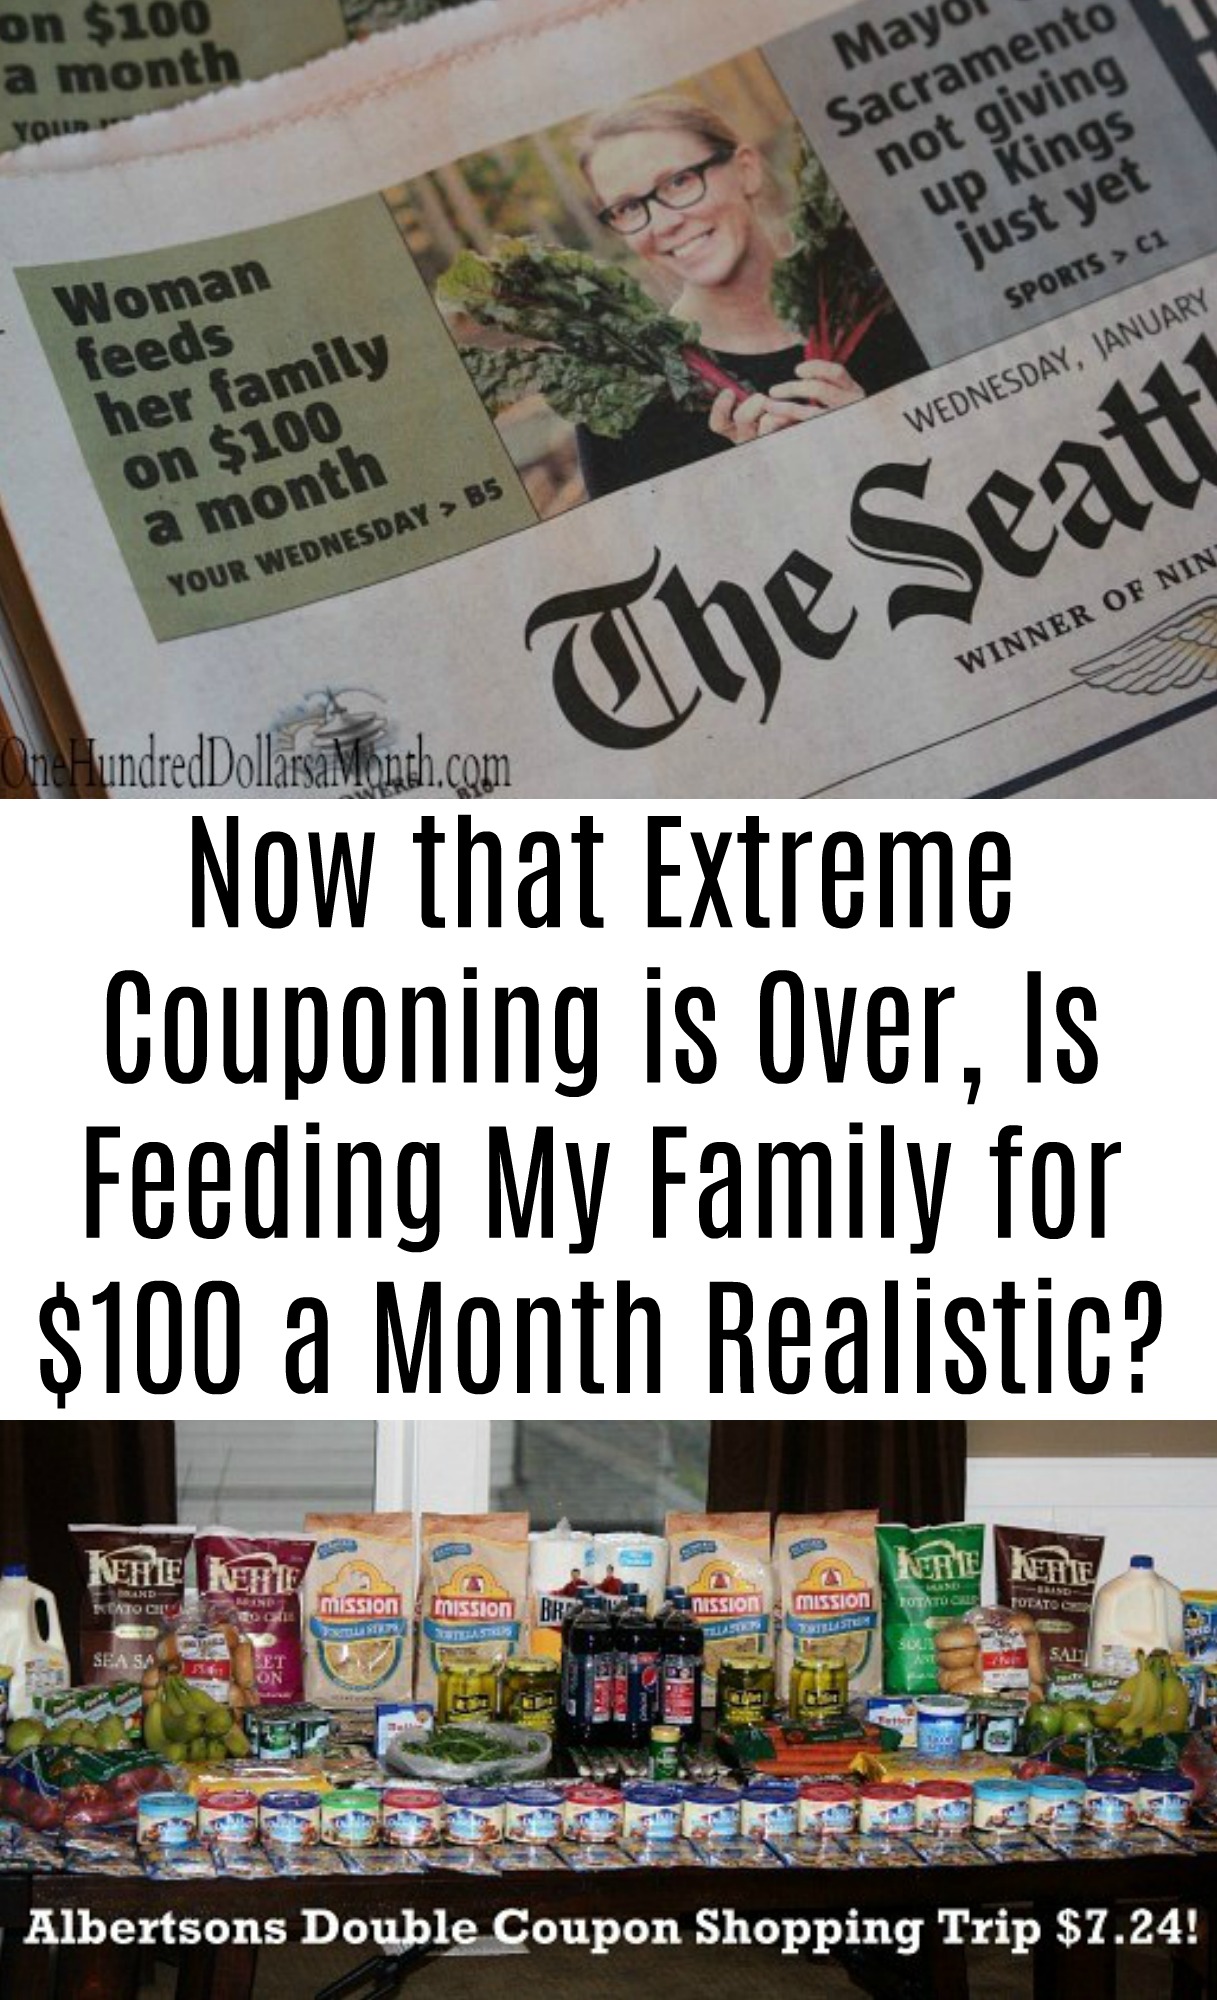 Now that Extreme Couponing is Over, Is Feeding My Family for $100 a Month Realistic?